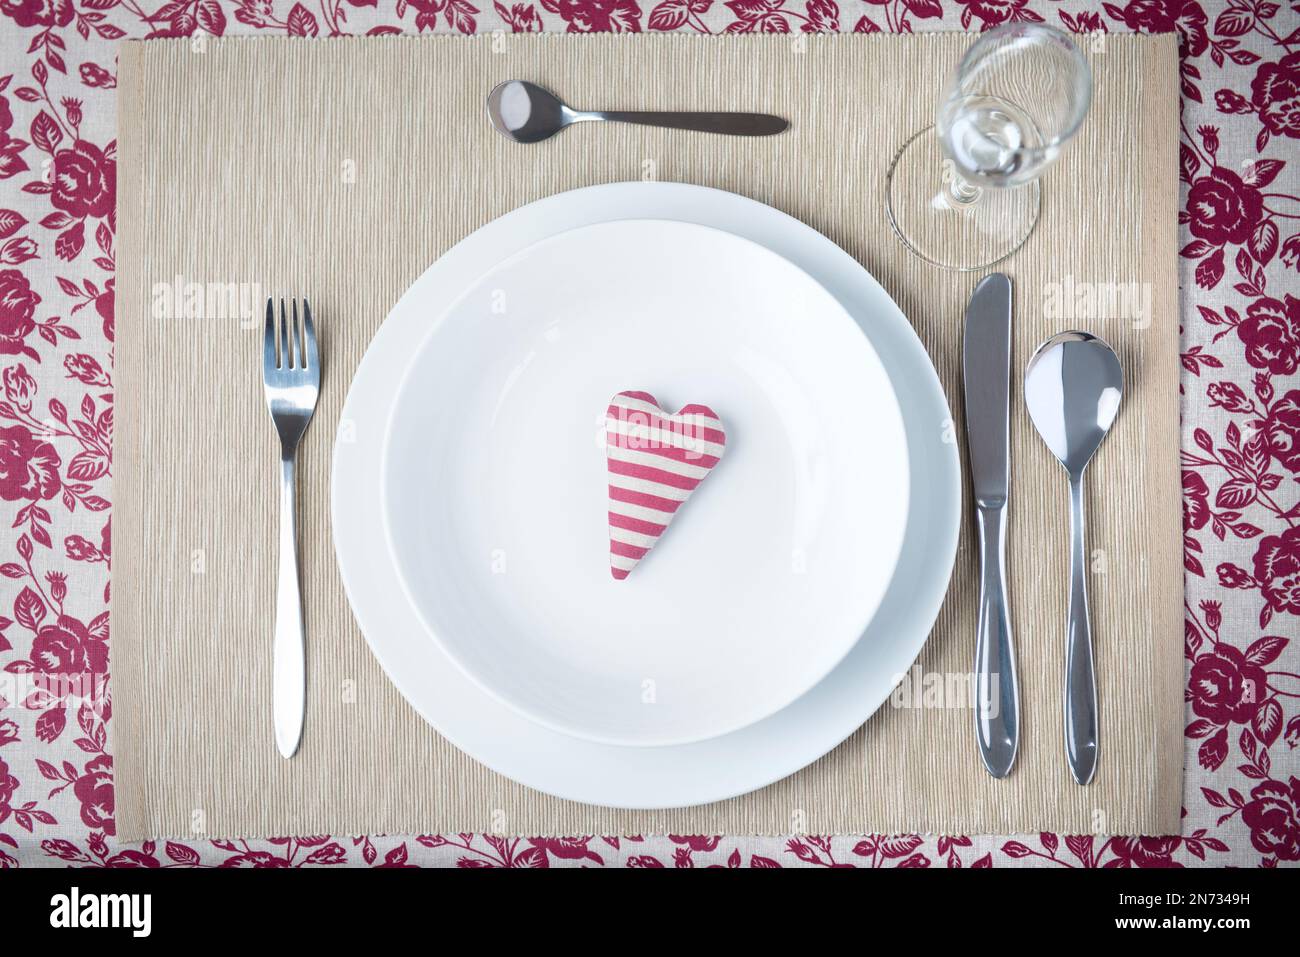 Valentine dinner concept - heart on a plate Stock Photo